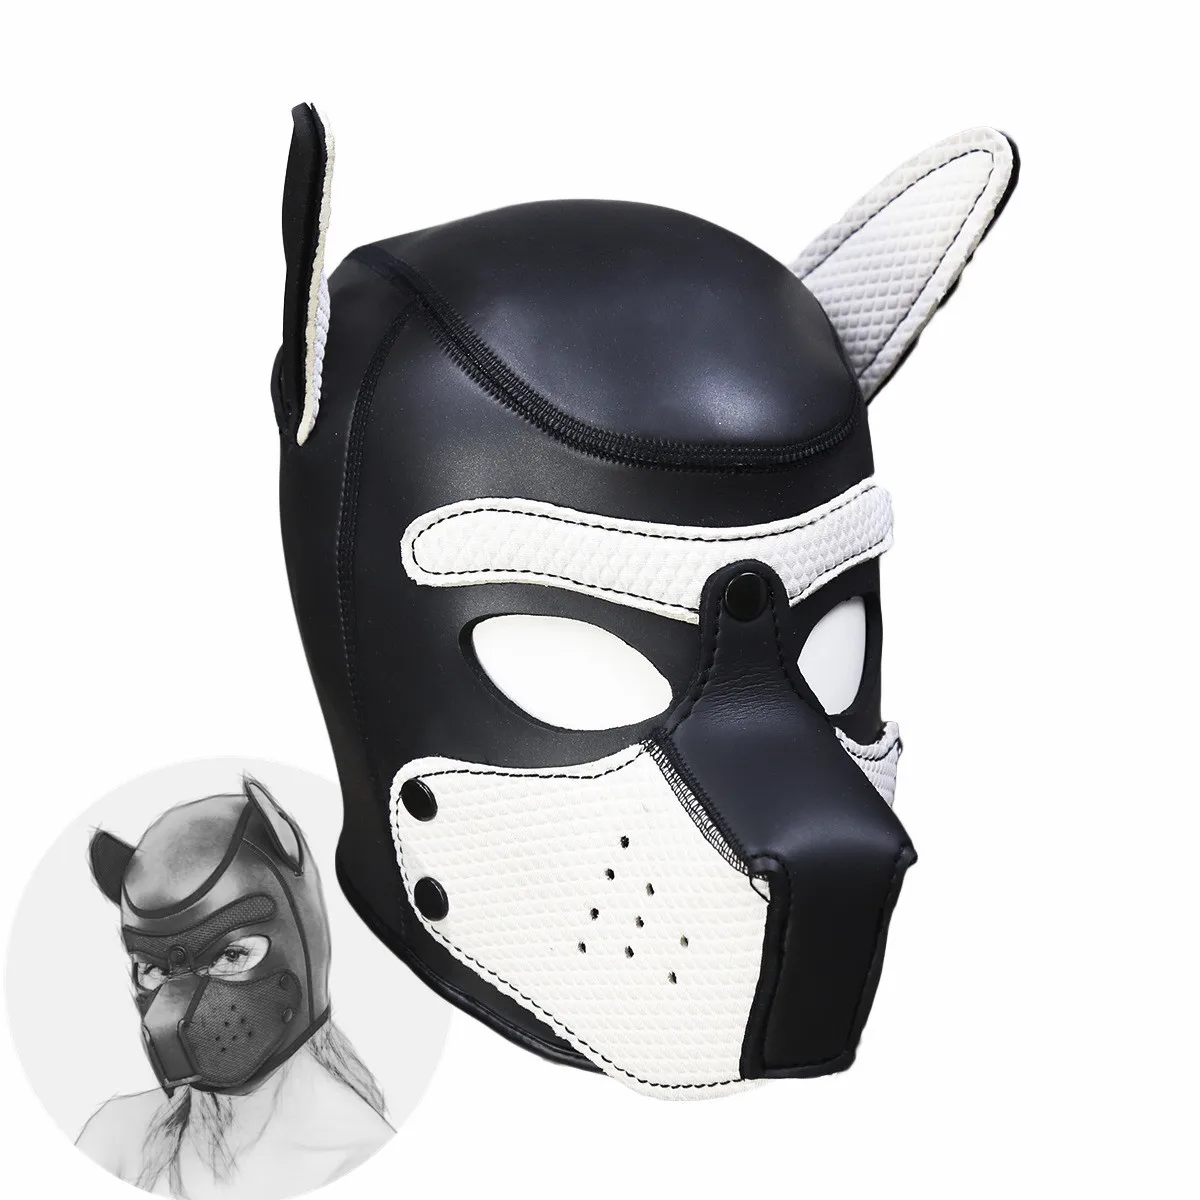 

Erotic Headgear SM Bondage Toys of Latex Puppy Play Head Mask Hoods for Men Women Fetish Adults Games Sex Products